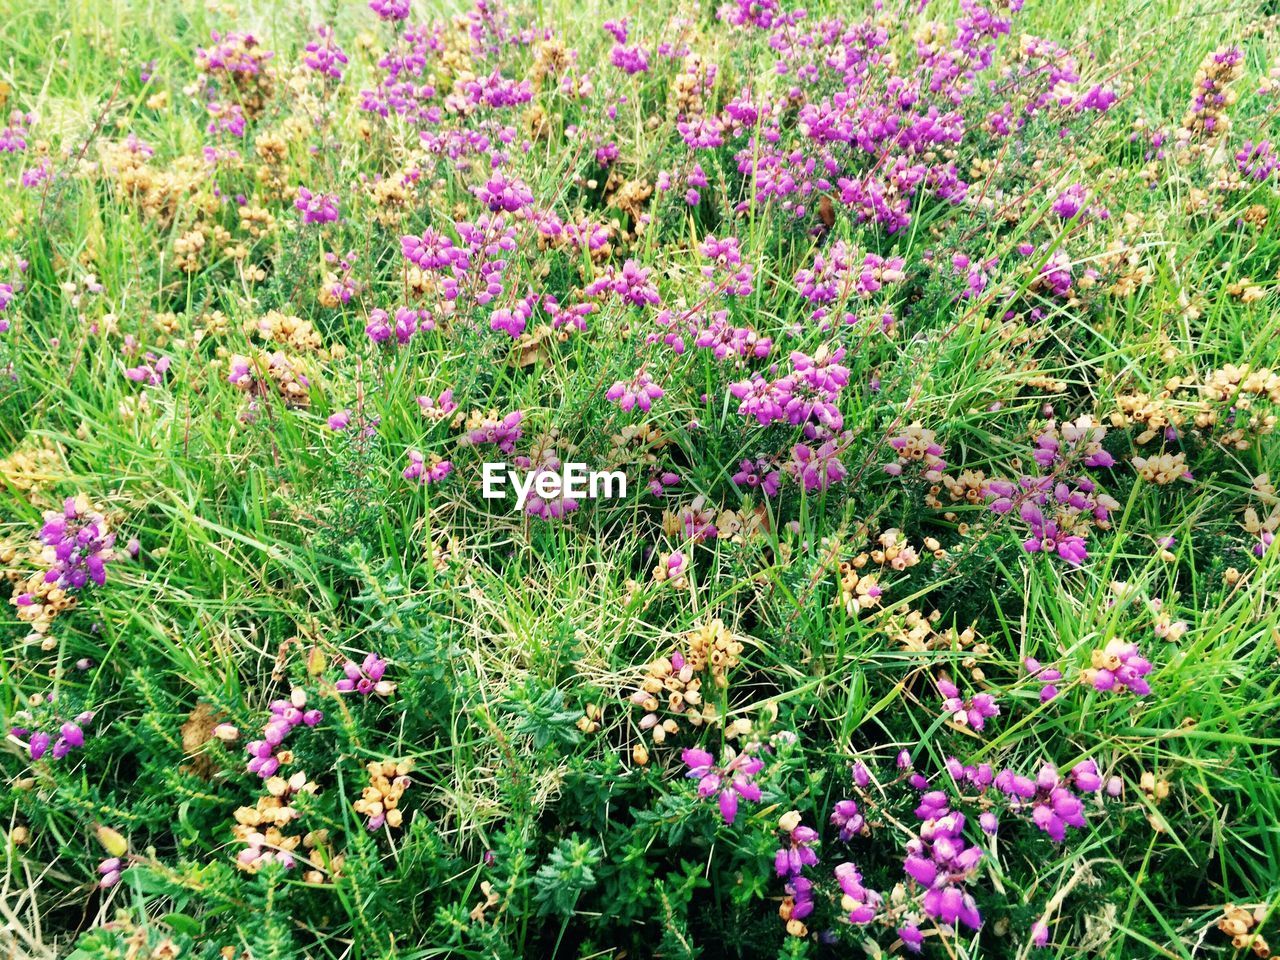 VIEW OF FLOWERS IN GRASS